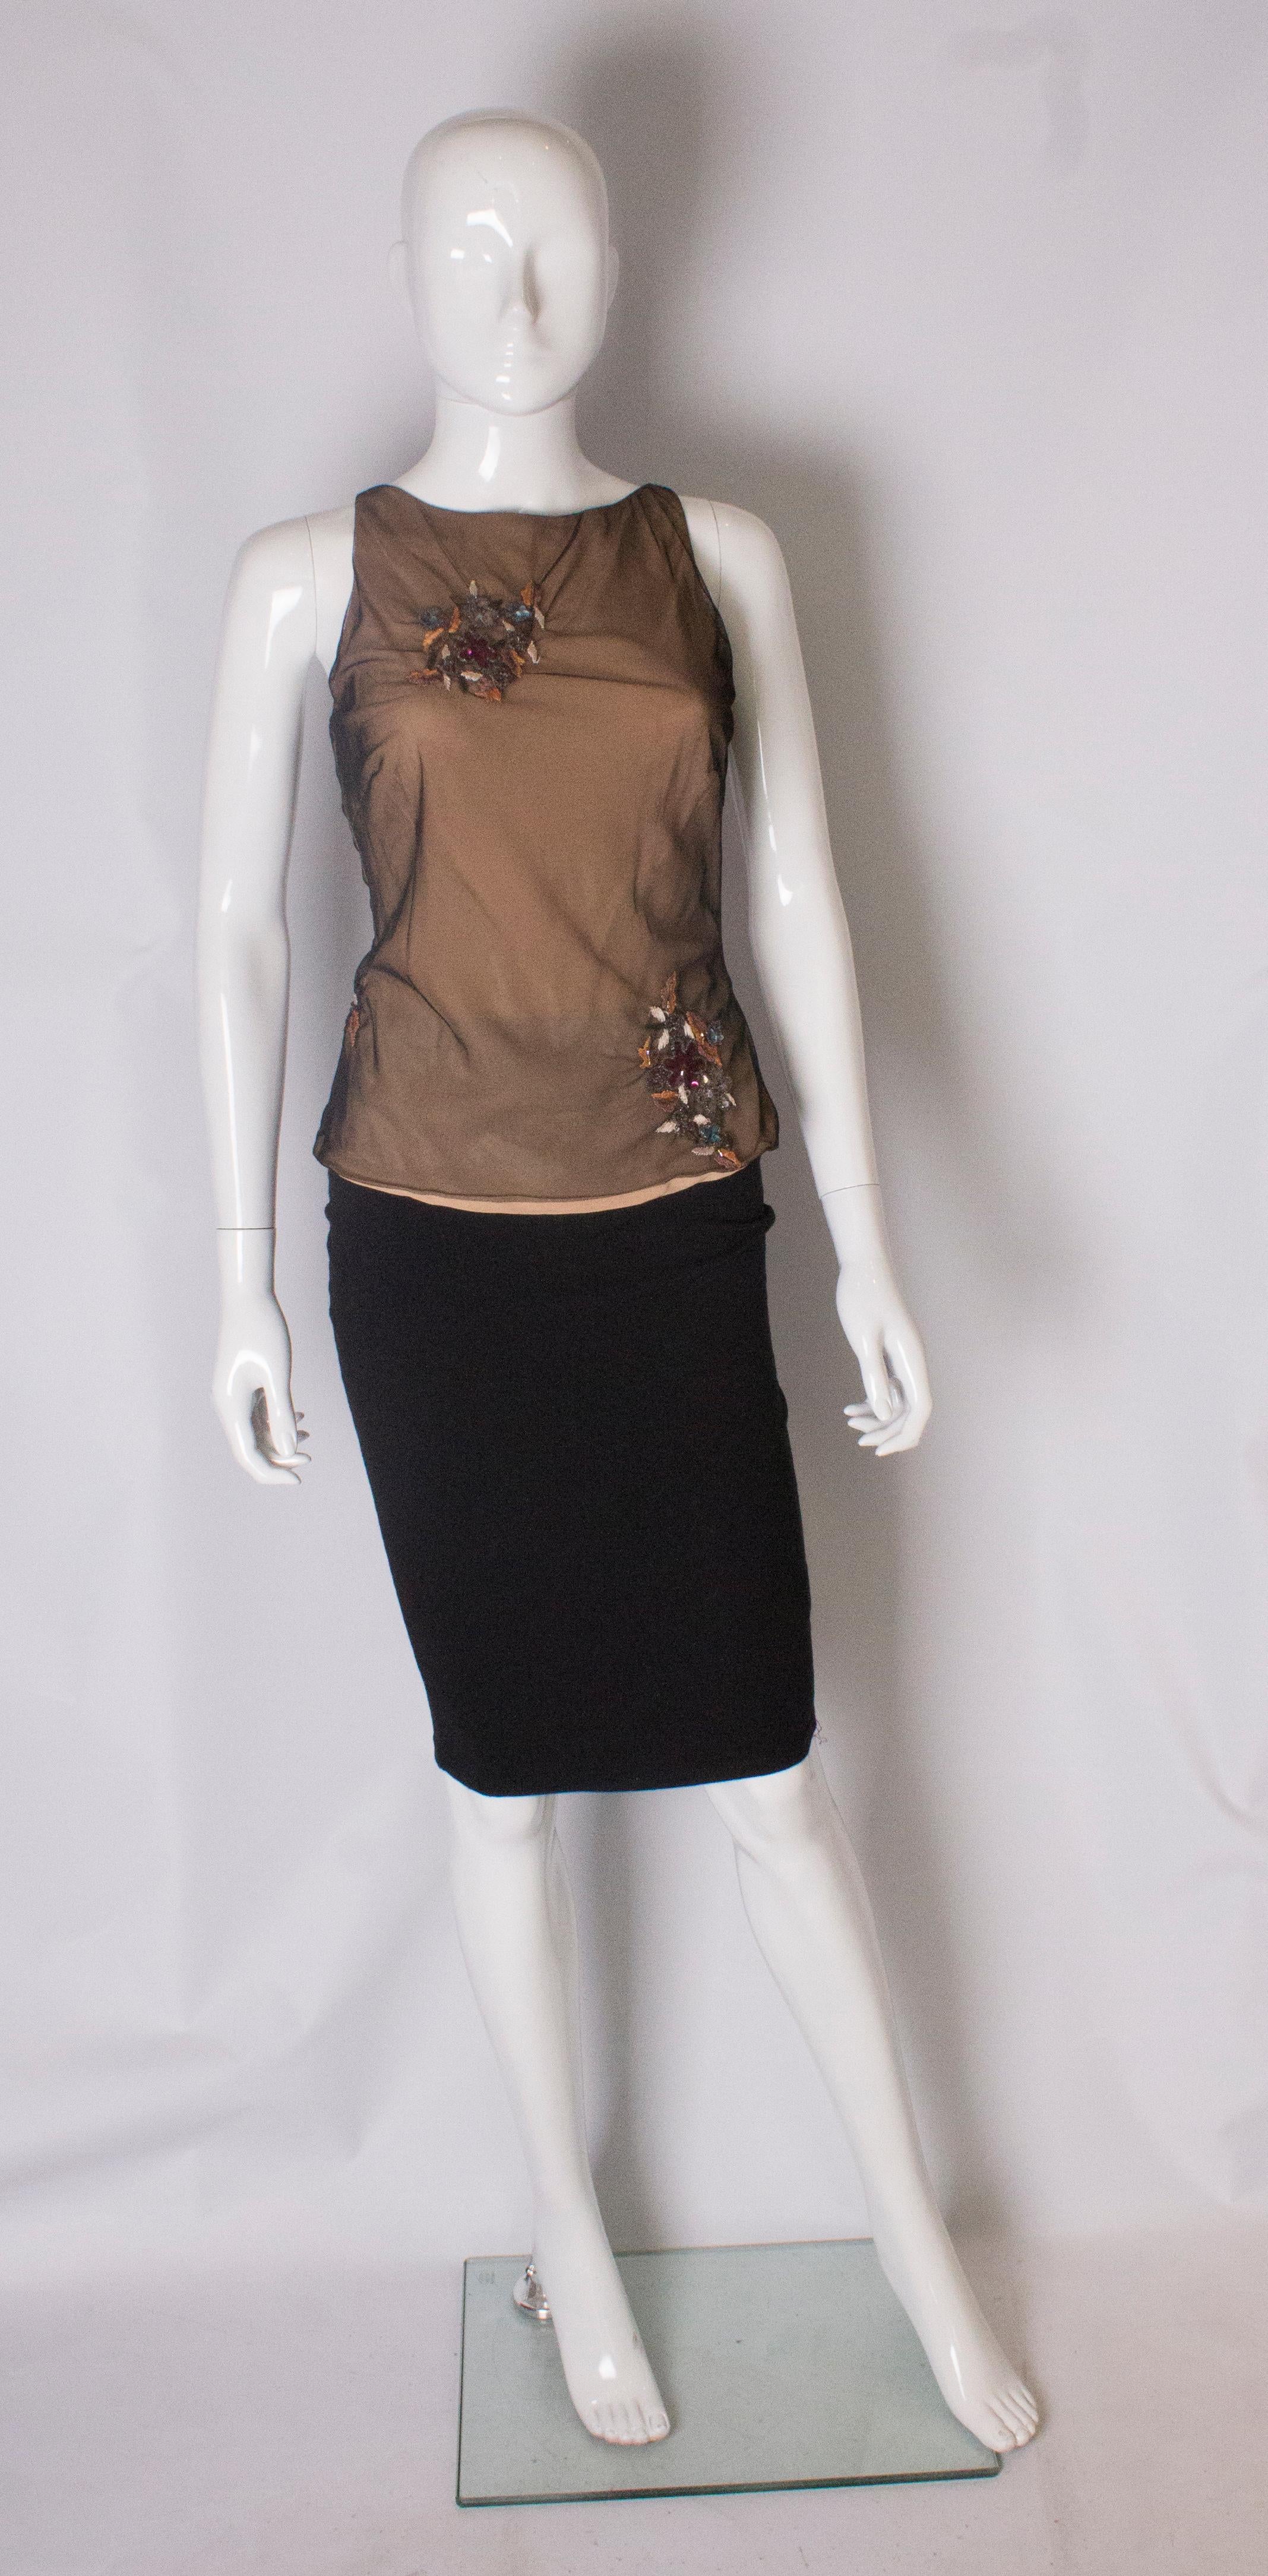 A chic top by Ben de Lisi, main line. The top is sleaveless with  a black net overlay ,and embellishment on the front and back. It has a tie opening at the back.